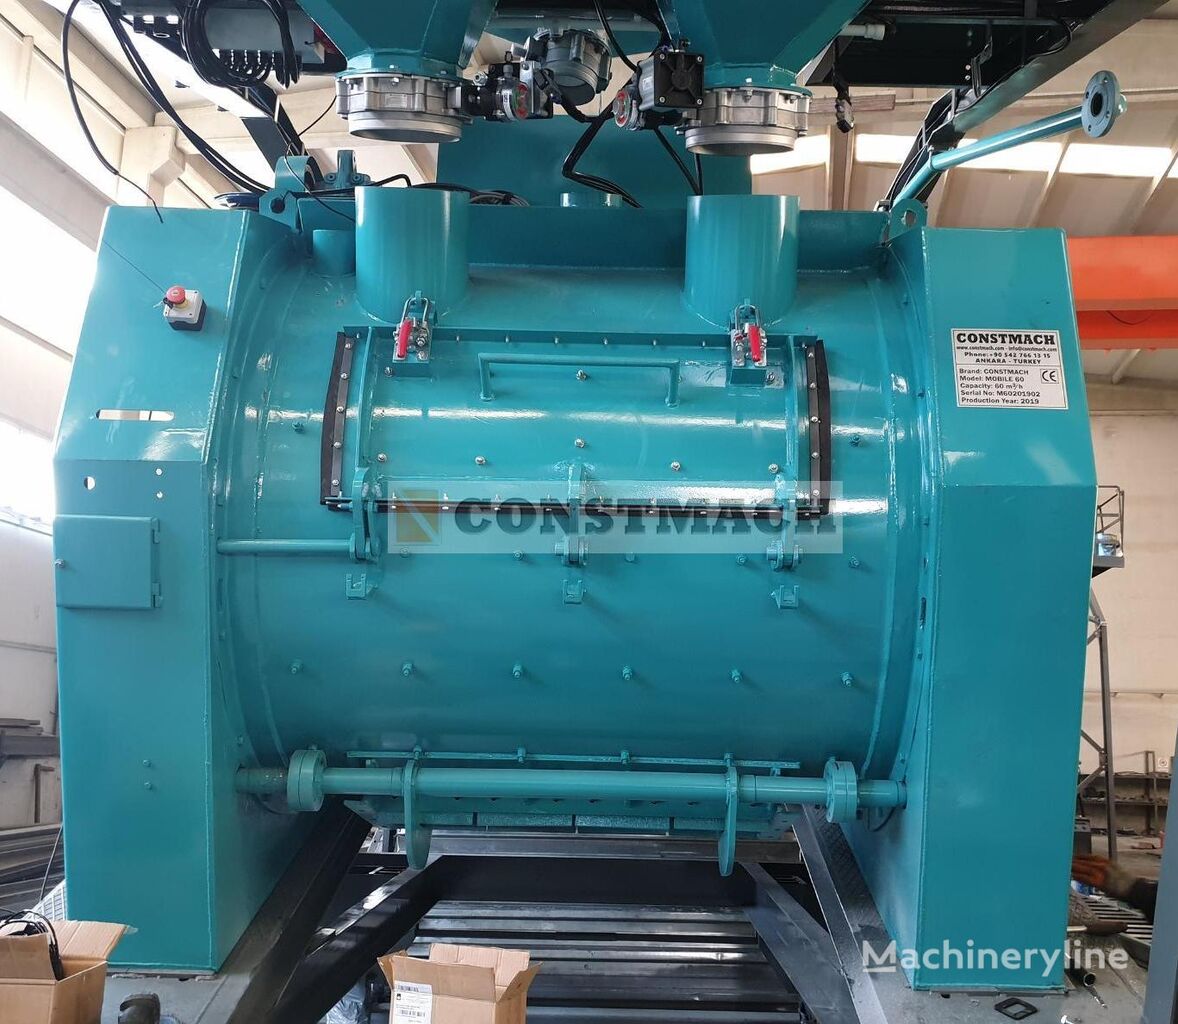 new Constmach Single Shaft Paddle Mixers - Constmach Technology concrete mixer